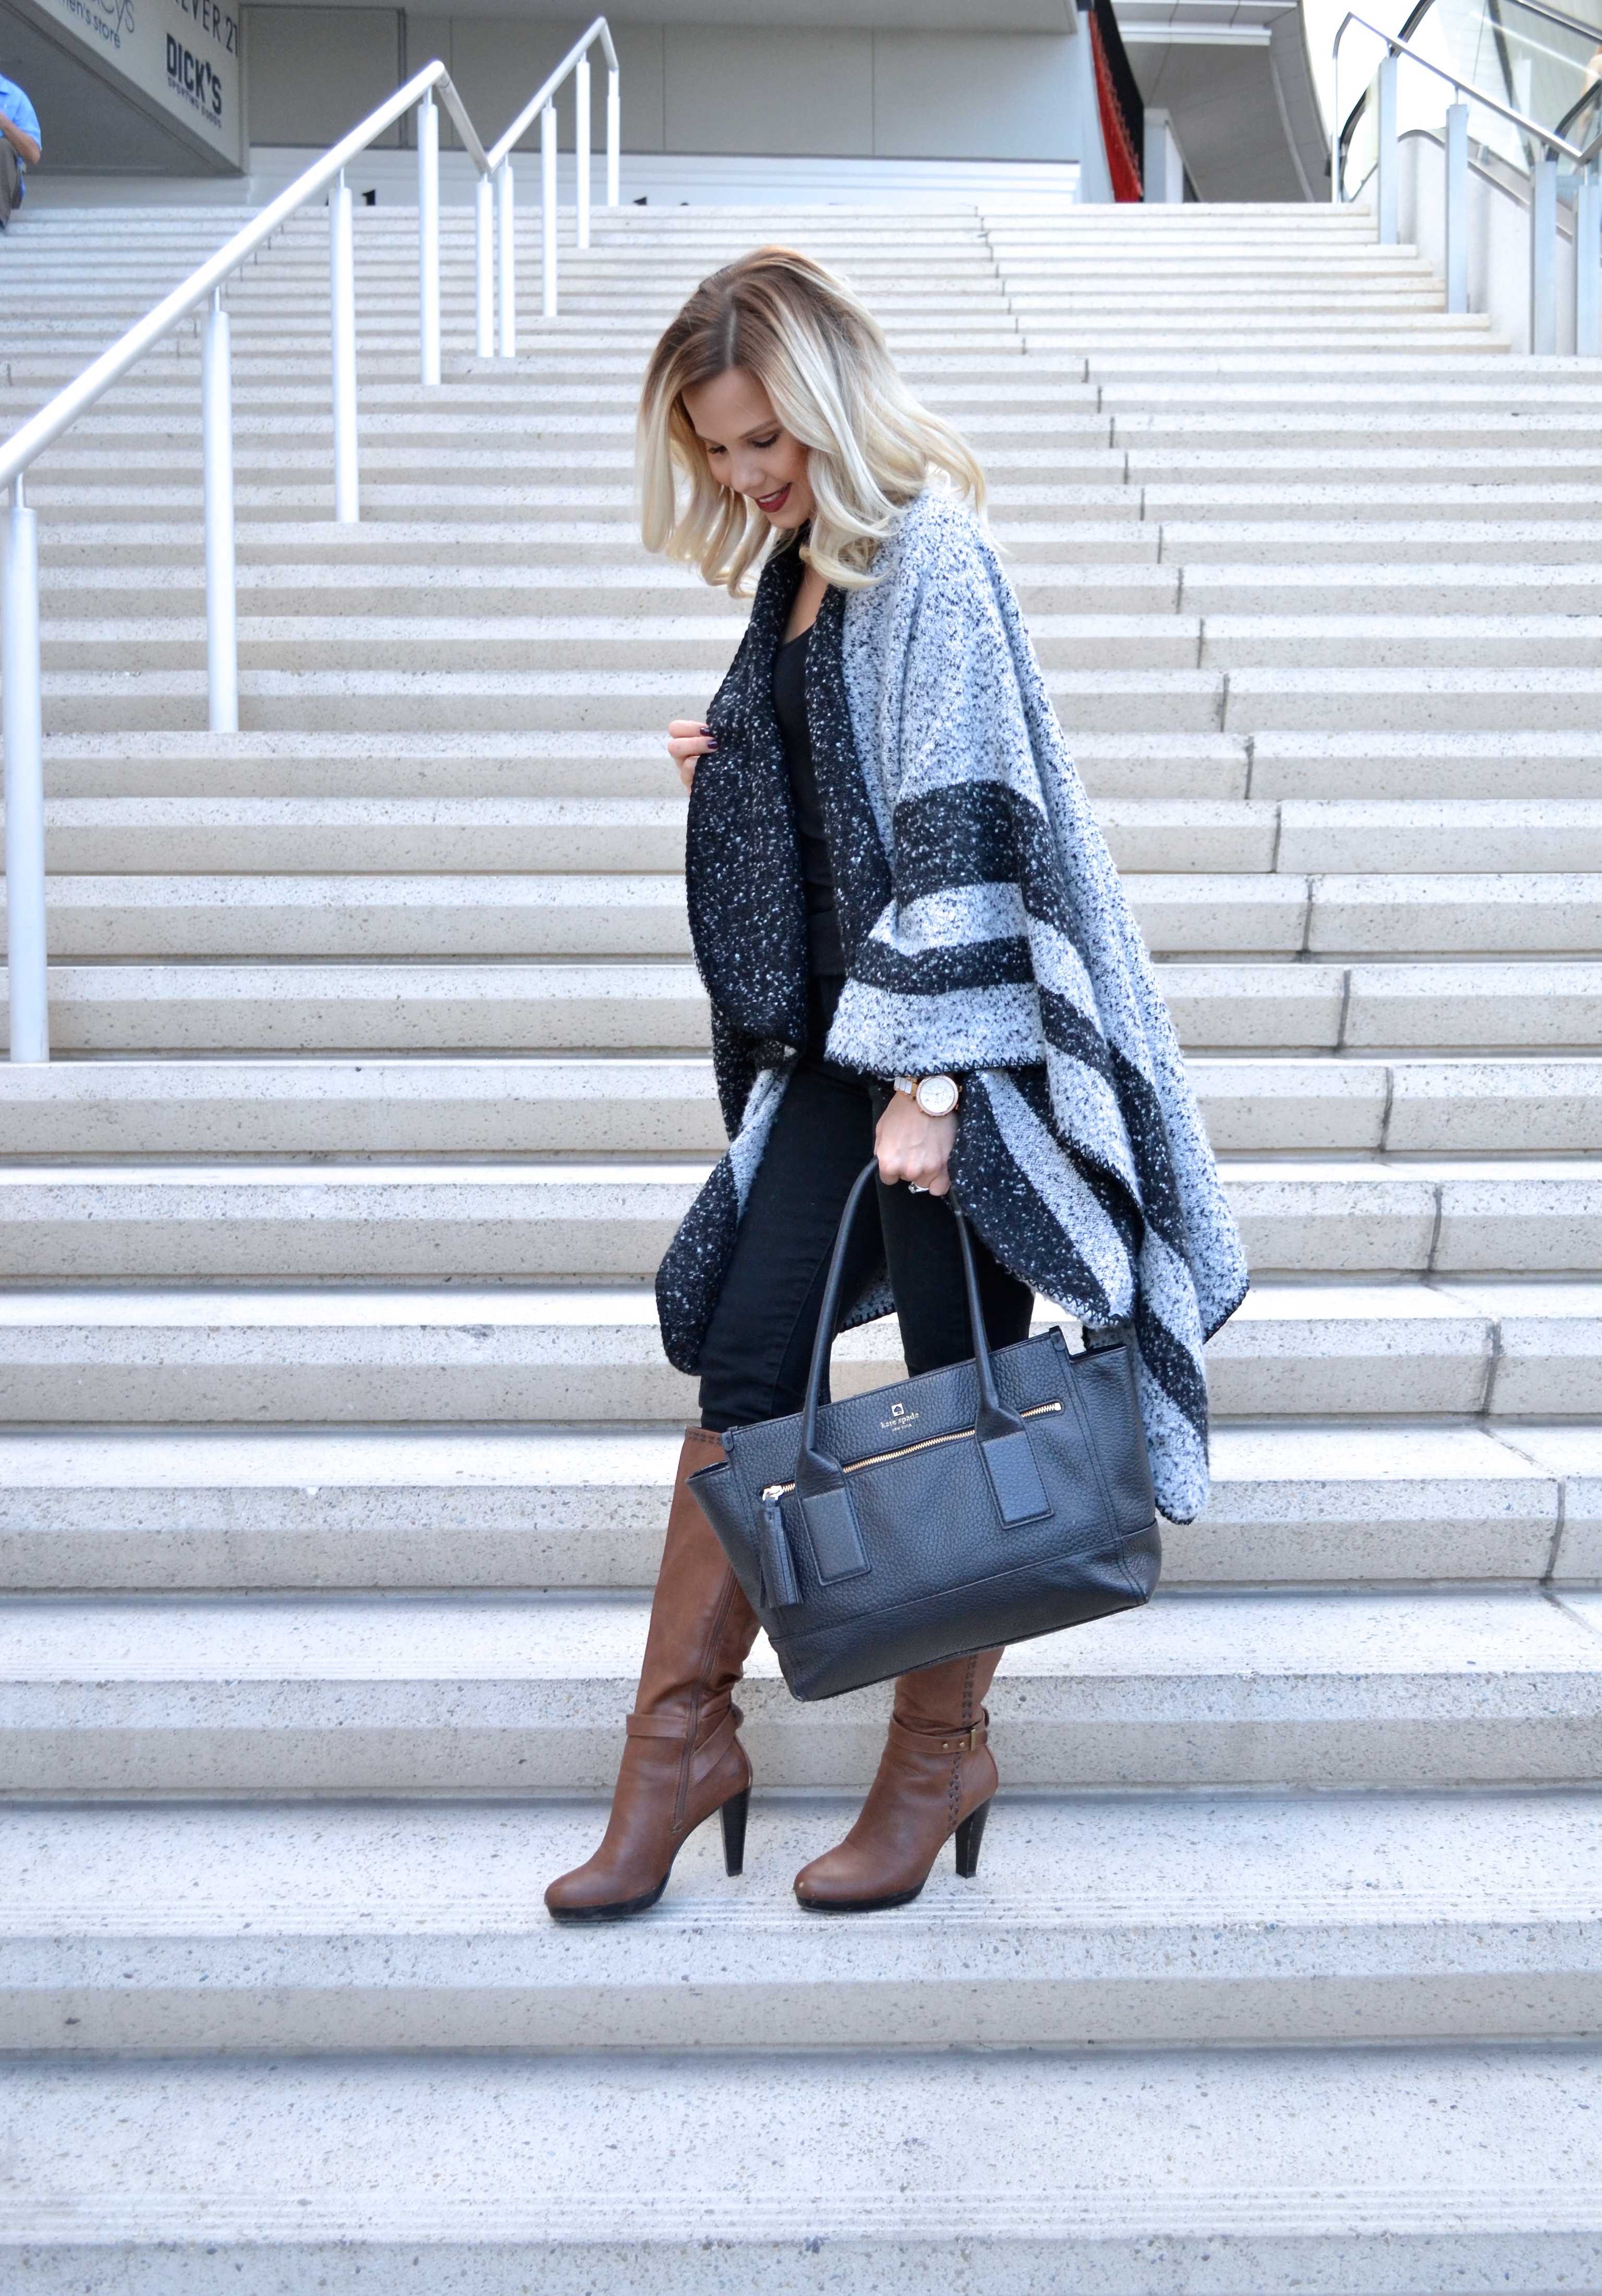 Black and Grey Poncho with Black Kate Spade Tote